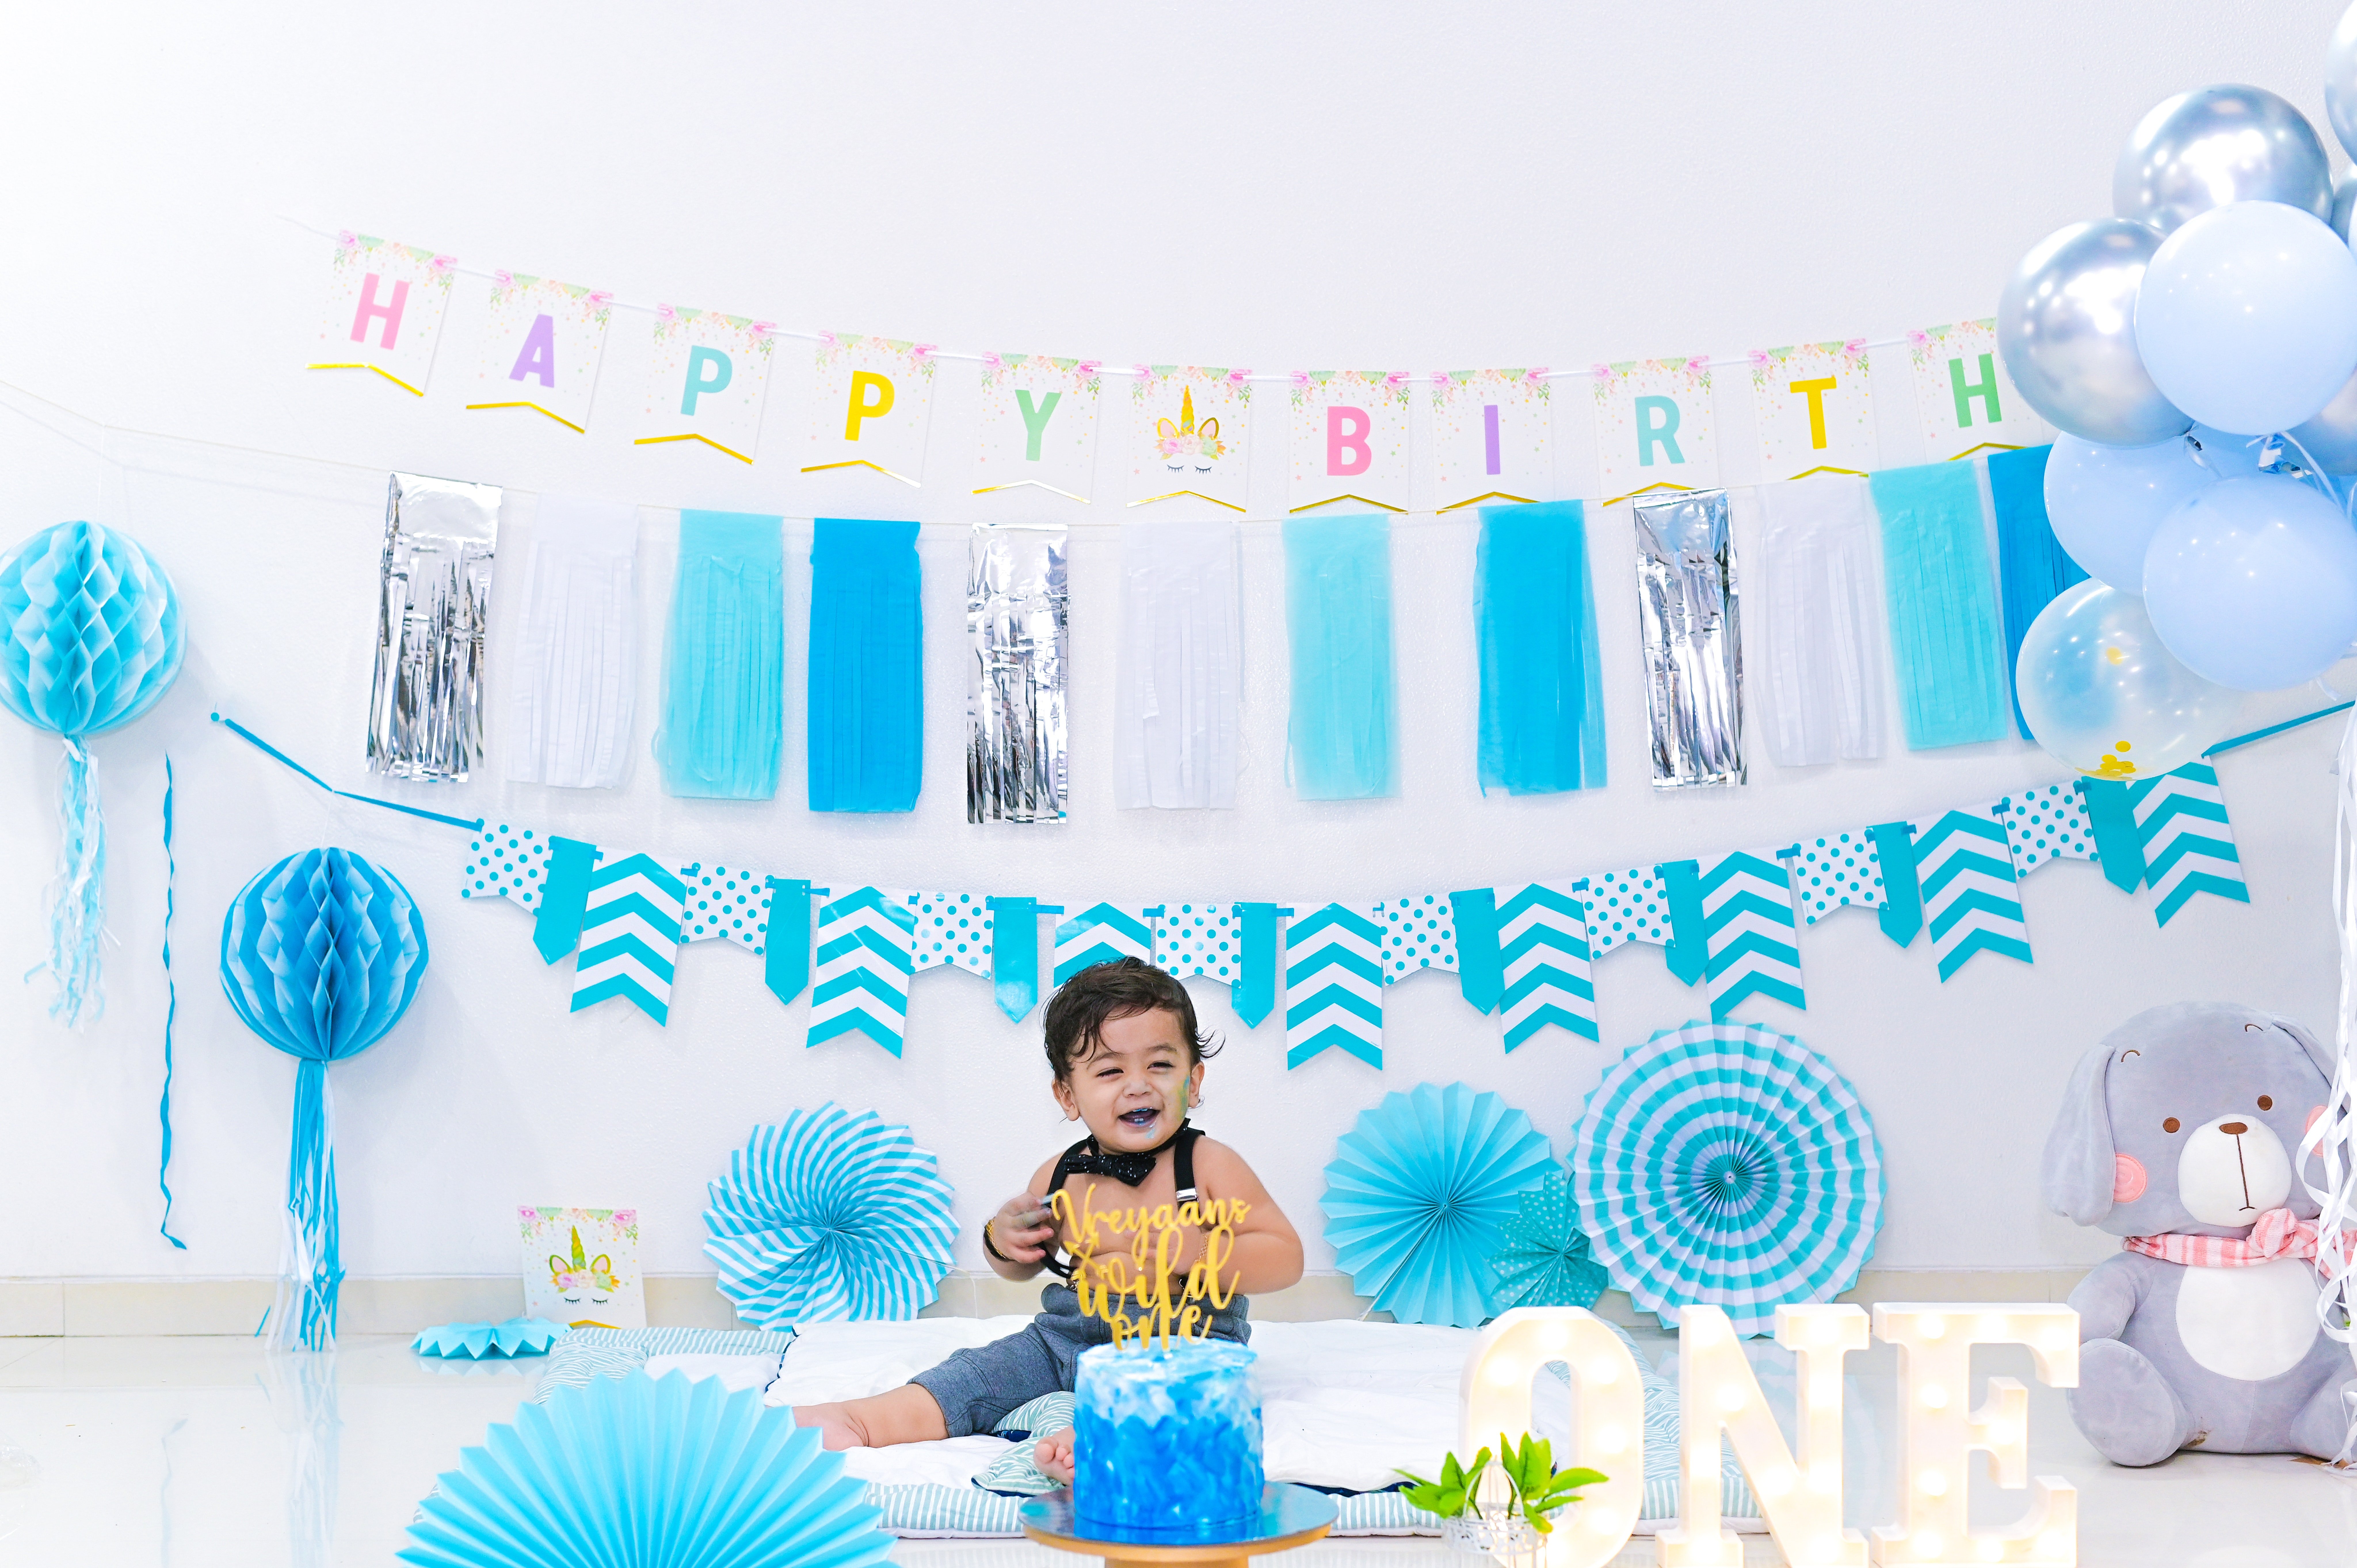 Poppy wasn't invited to Max's birthday. | Source: Pexels